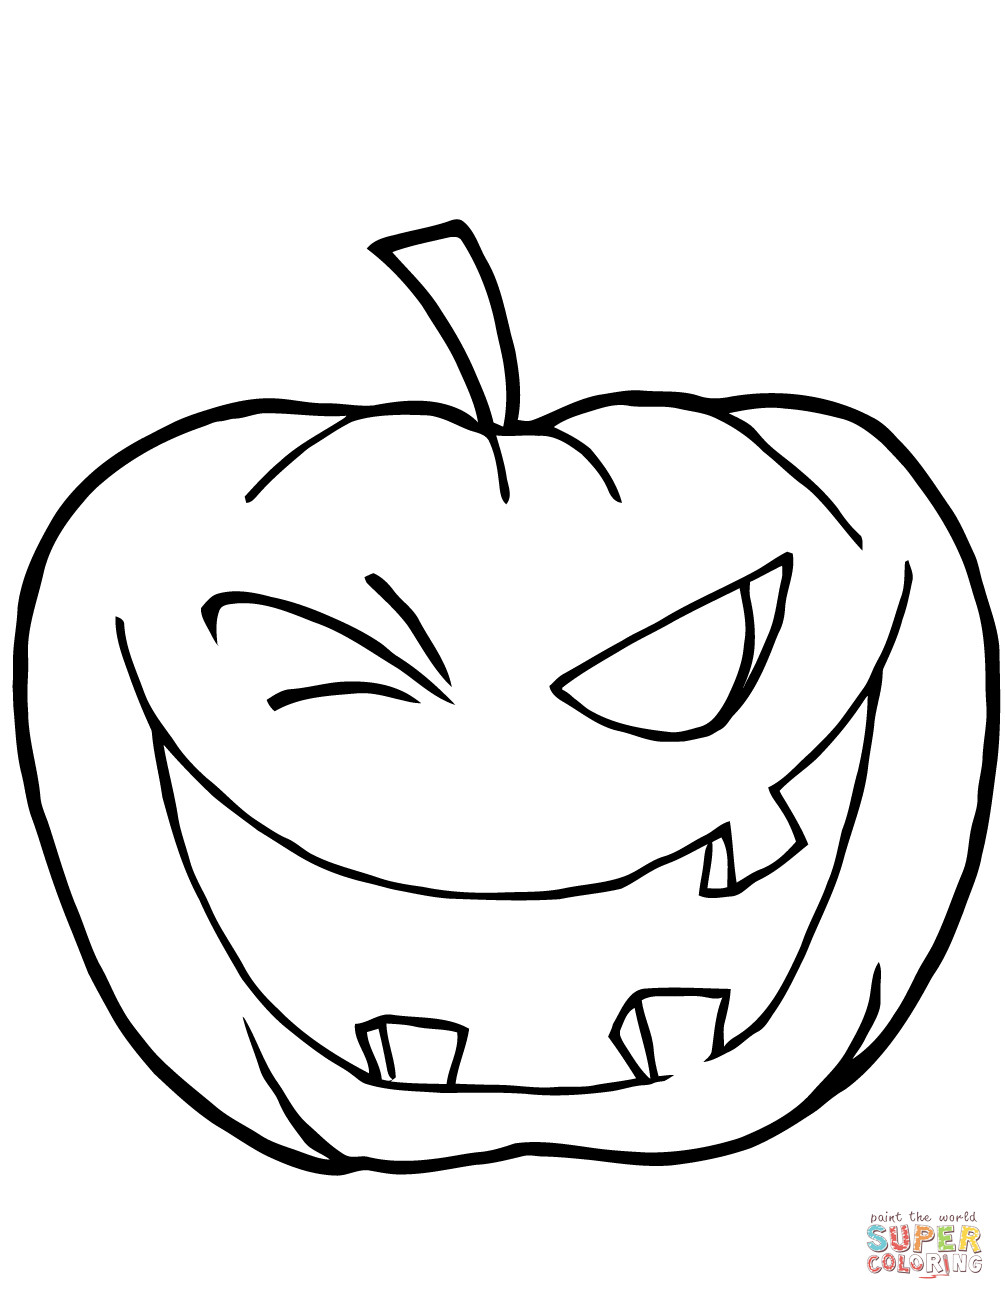 Halloween Pumpkins Coloring Pages
 Halloween Pumpkin Winking coloring page